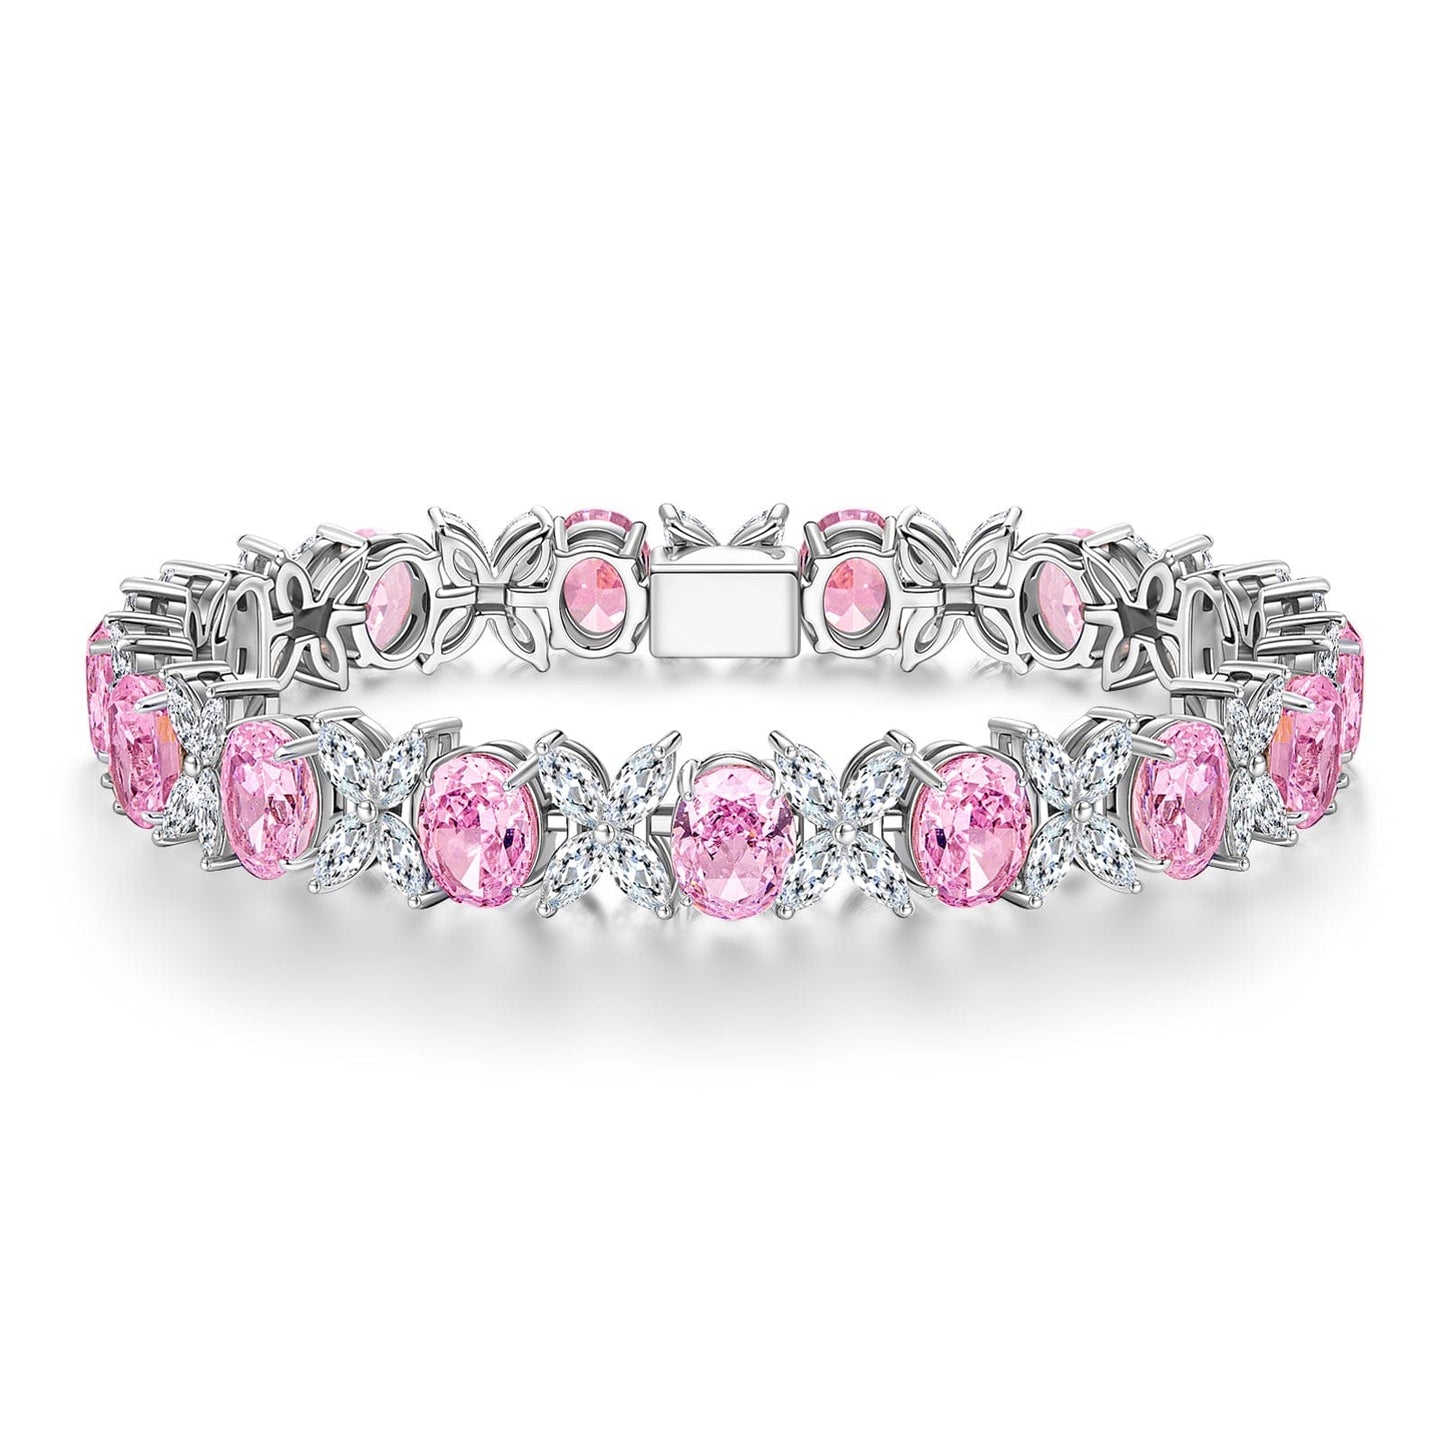 Amidst Petals of Clover Tarnish-resistant Silver Frost Flower Cut Cubic Zirconia Bracelet In White Gold Plated